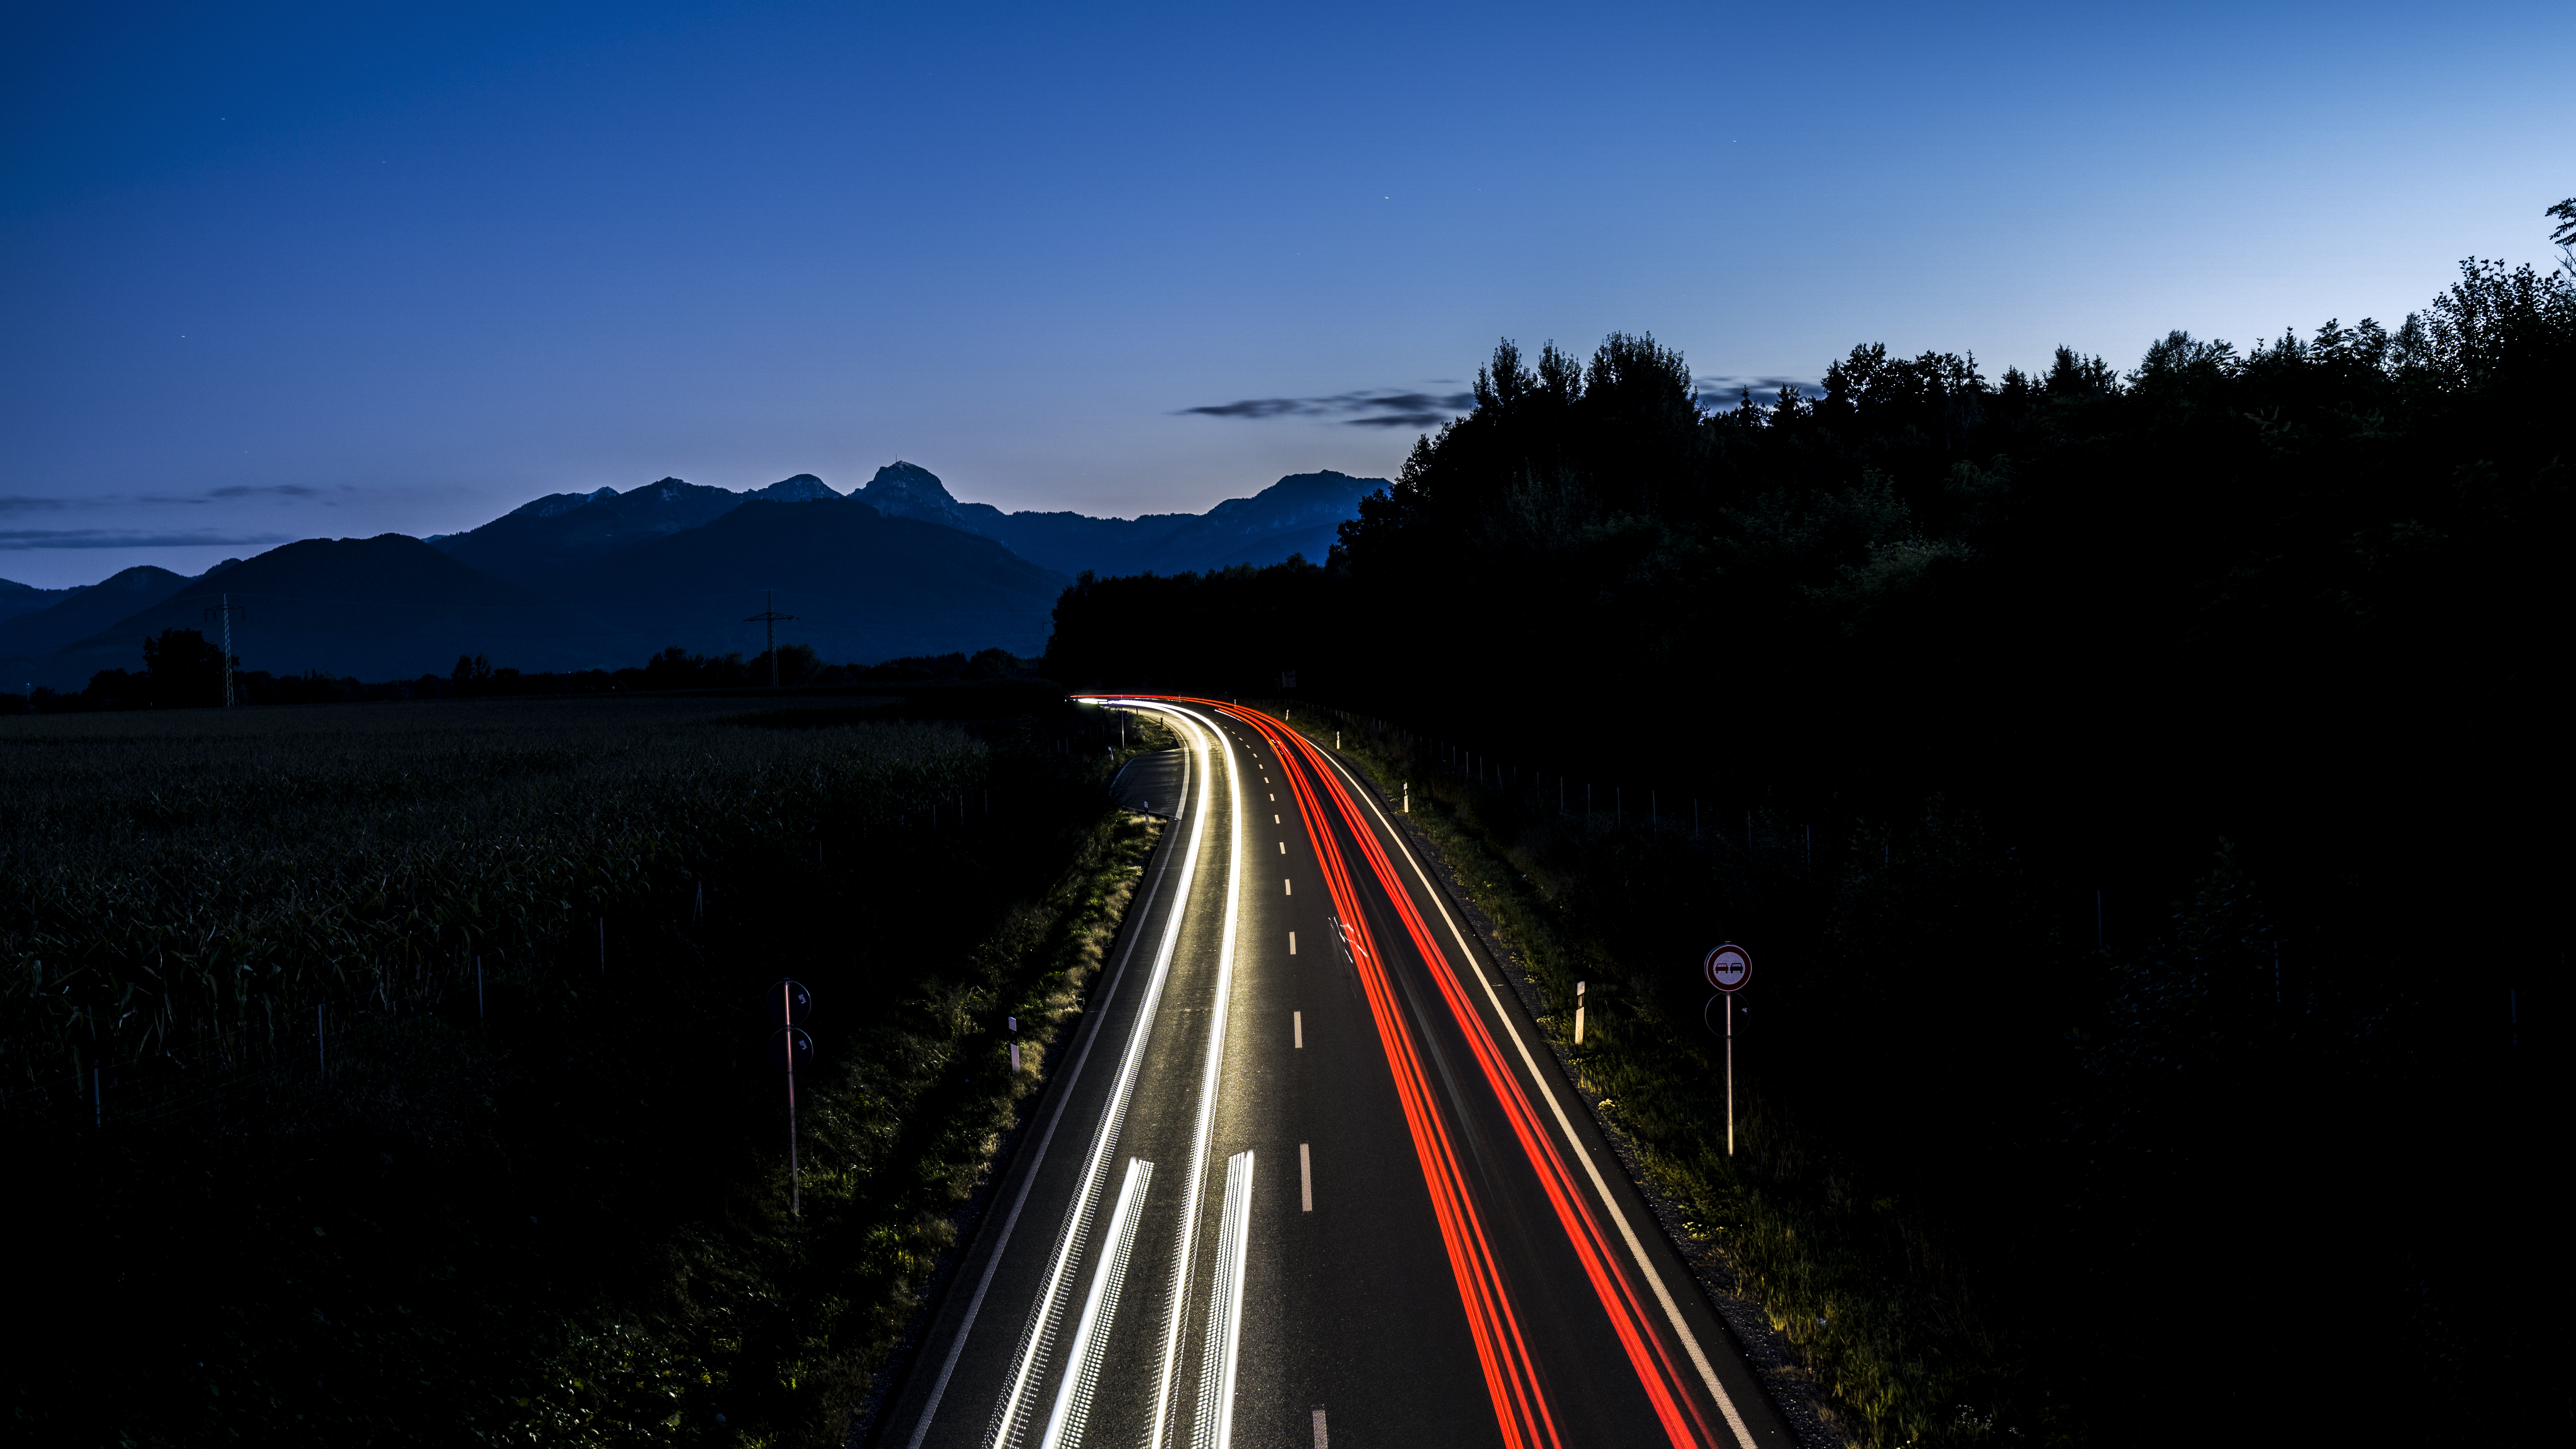 Long Exposure Night Road Street Lights Dark Trees Mountains Landscape Wide Angle Light Trails Outdoo 6000x3376